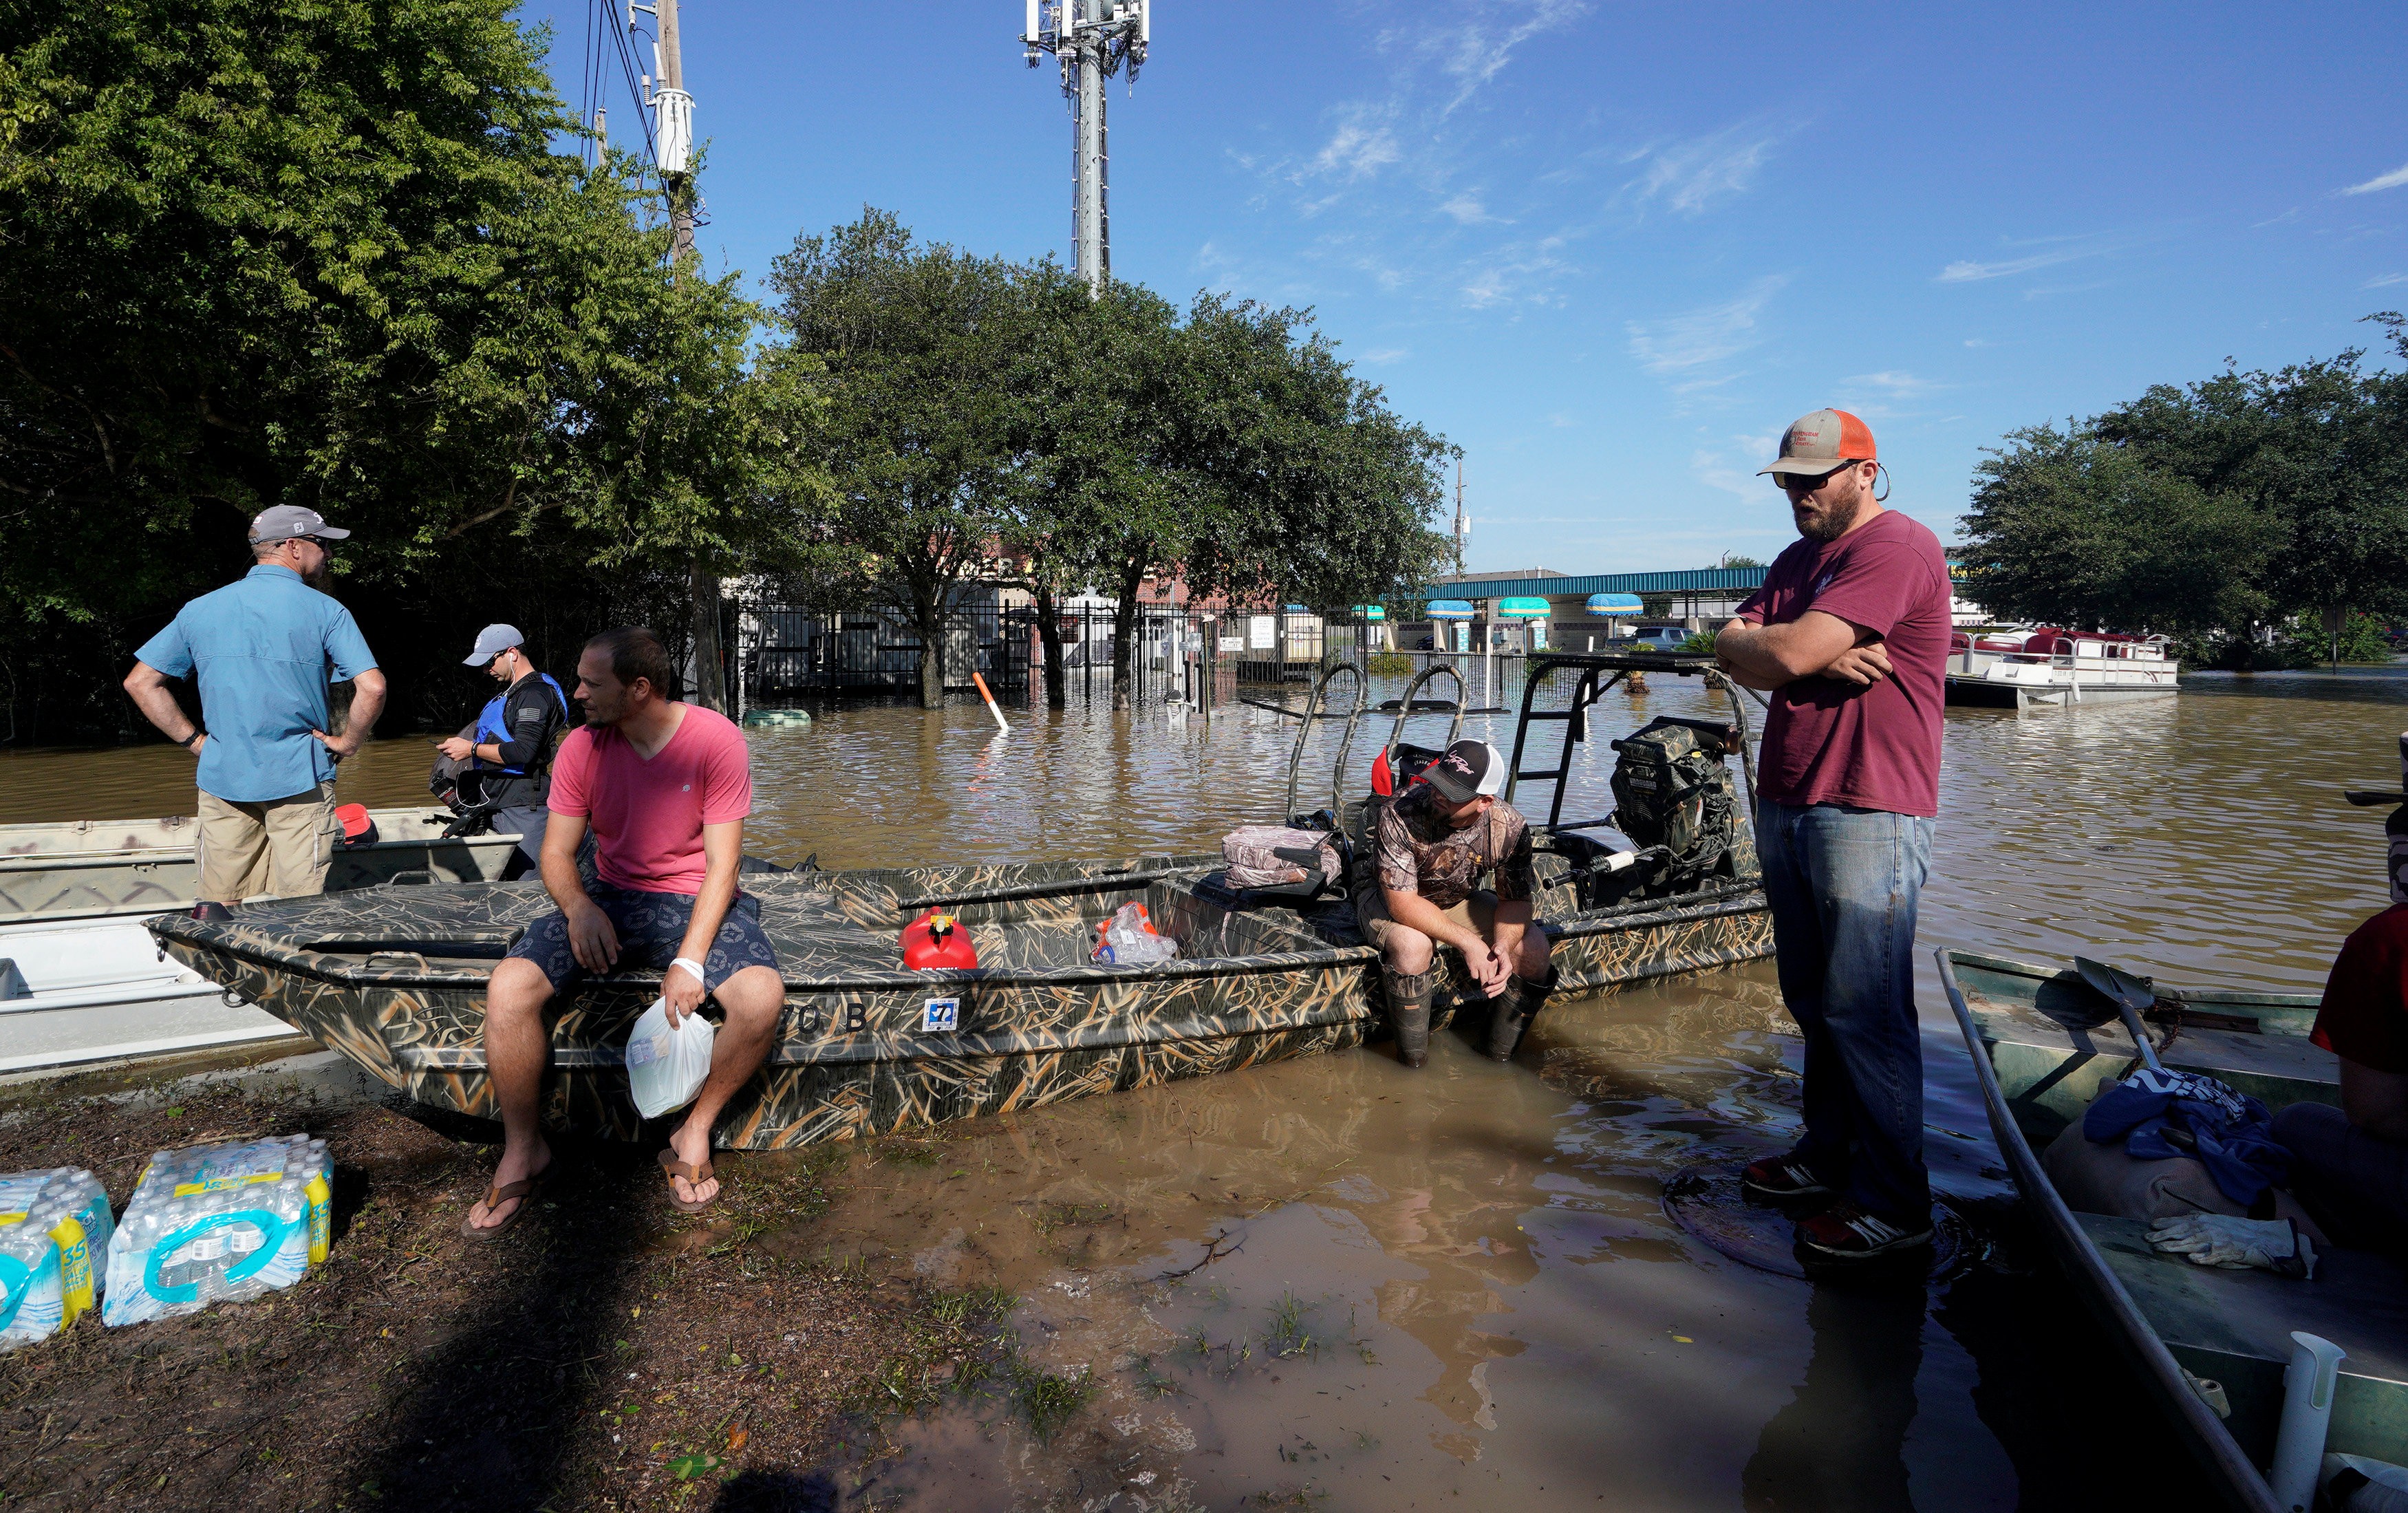 The sun finally came out as floodwaters recede as volunteers with boats wait to evacuate victims stuck in Tropical Storm Harvey’s floodwaters in western Houston. Photo: Reuters